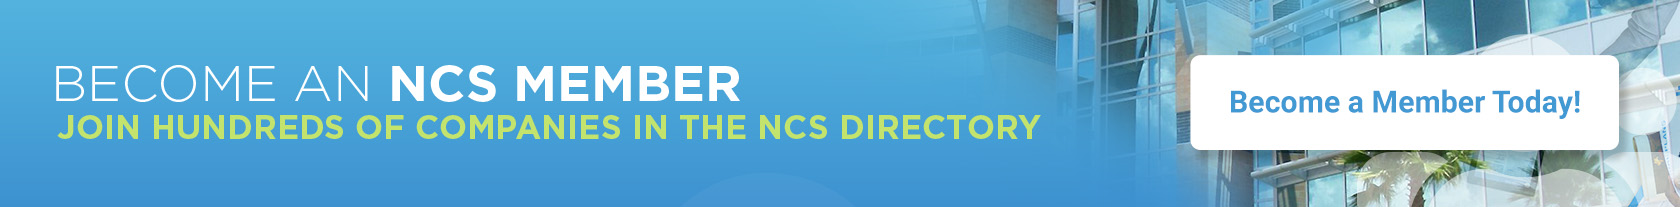 become an NCS member